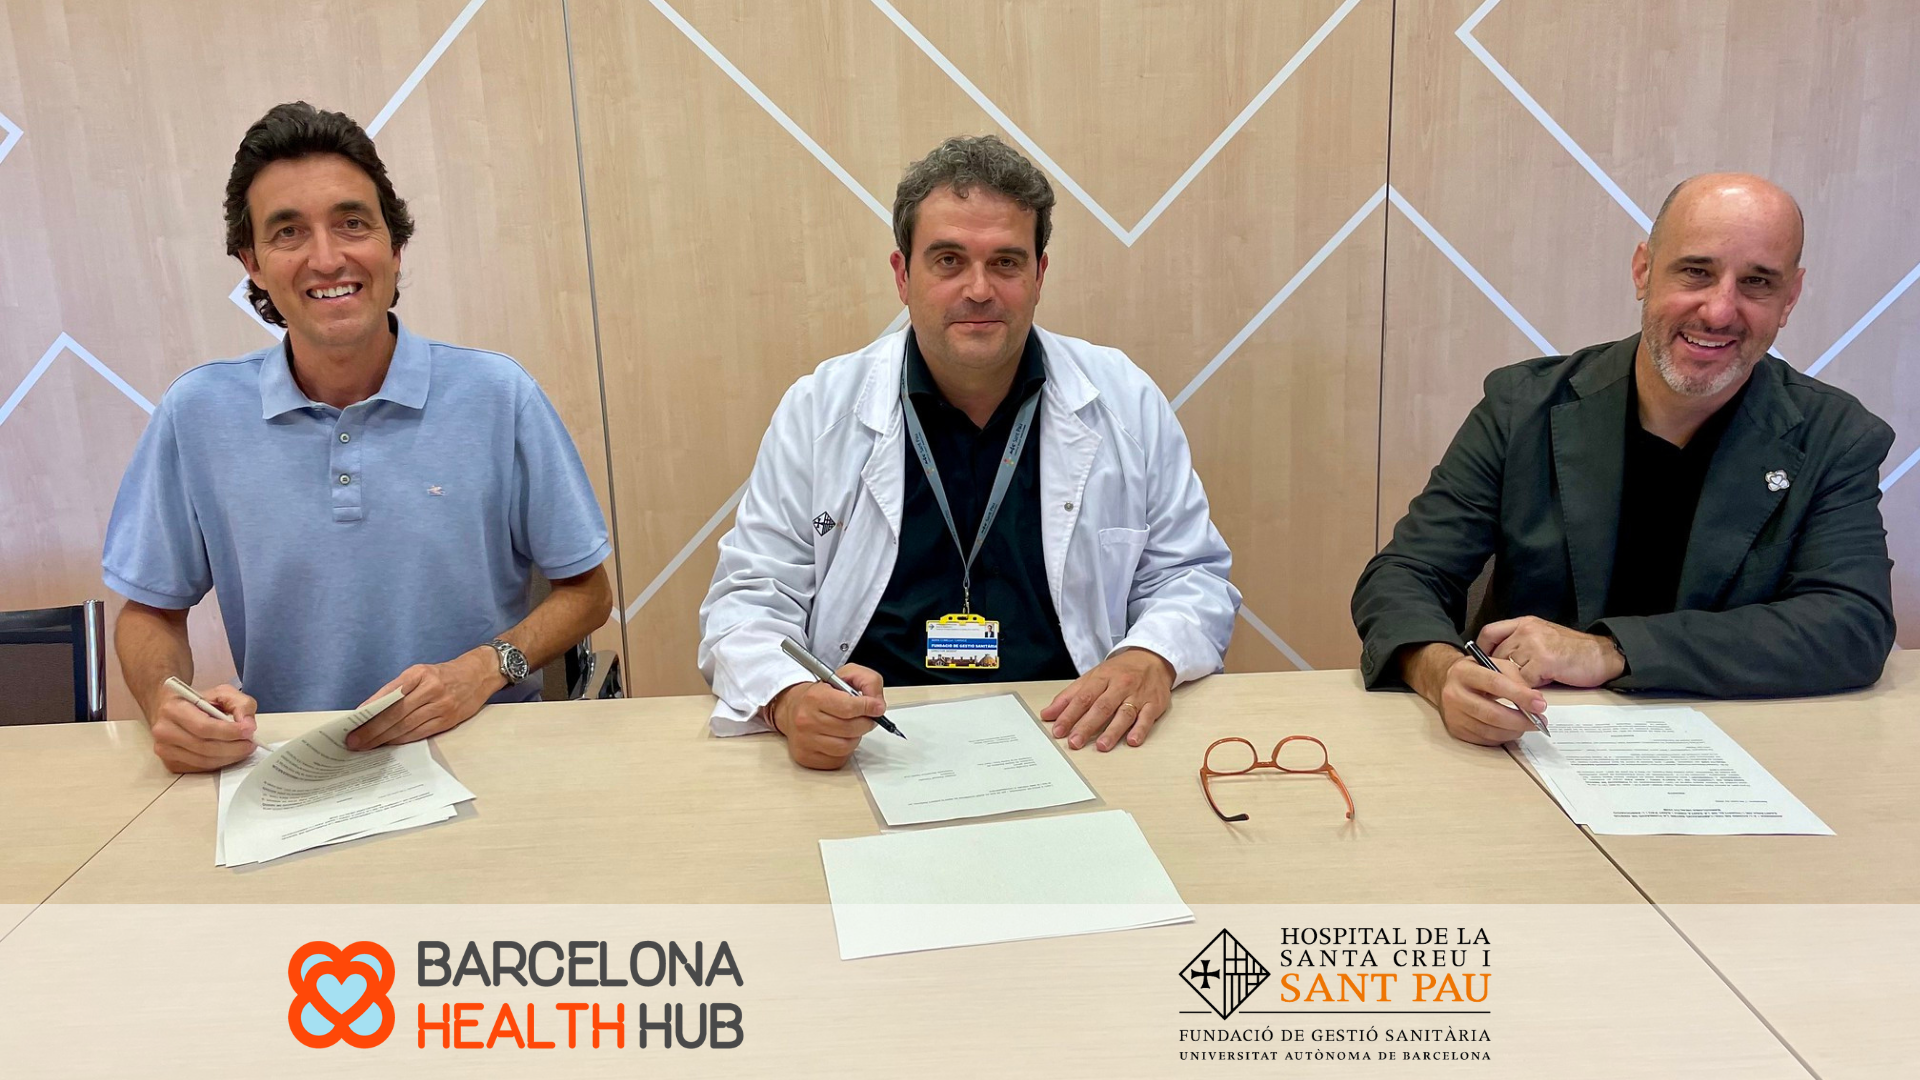 Barcelona Health Hub and Hospital de Sant Pau create a centre to accelerate technology transfer in the field of health